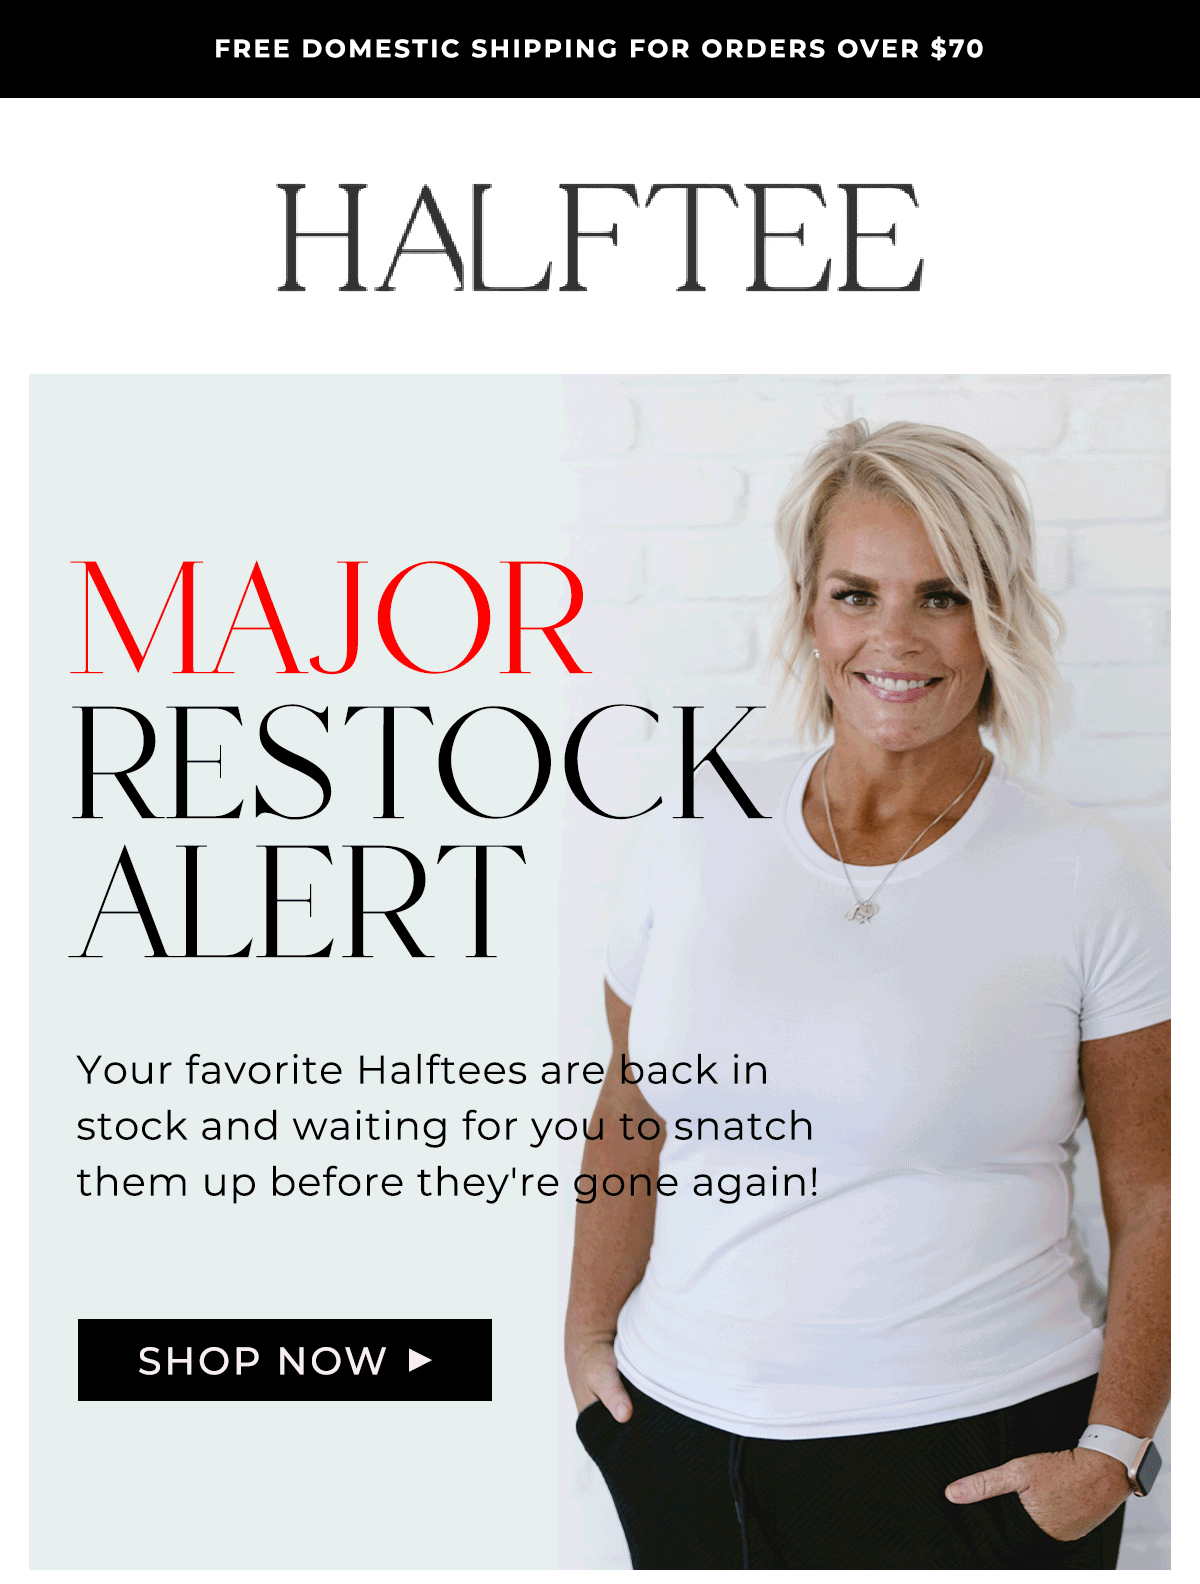 Major Restock Alert Your favorite Halftees are back in stock and waiting for you to snatch them up before they're gone again!